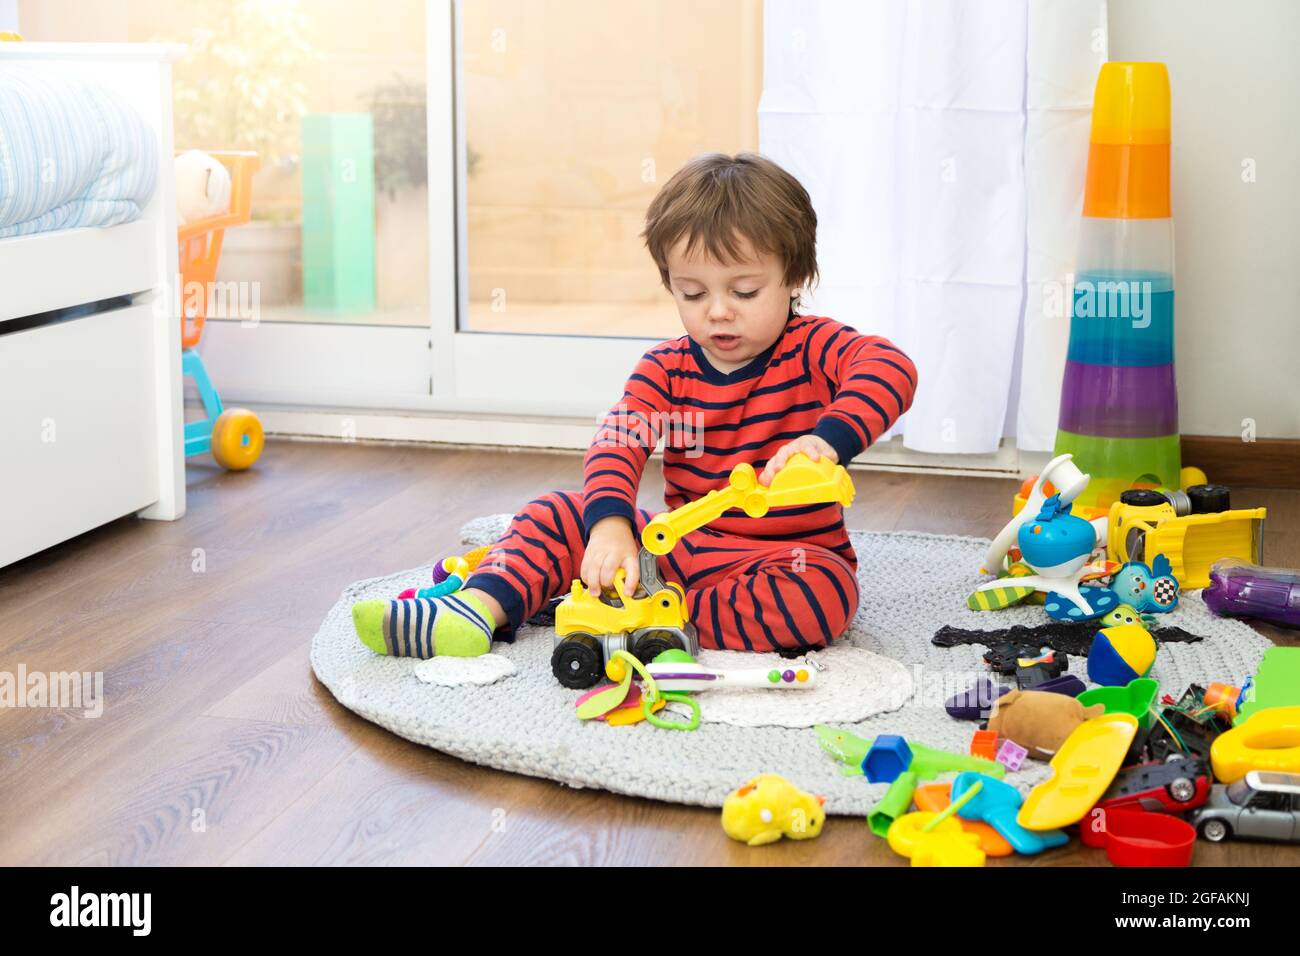 Little toddler playing lonely with many toys in his bedroom. Stock Photo